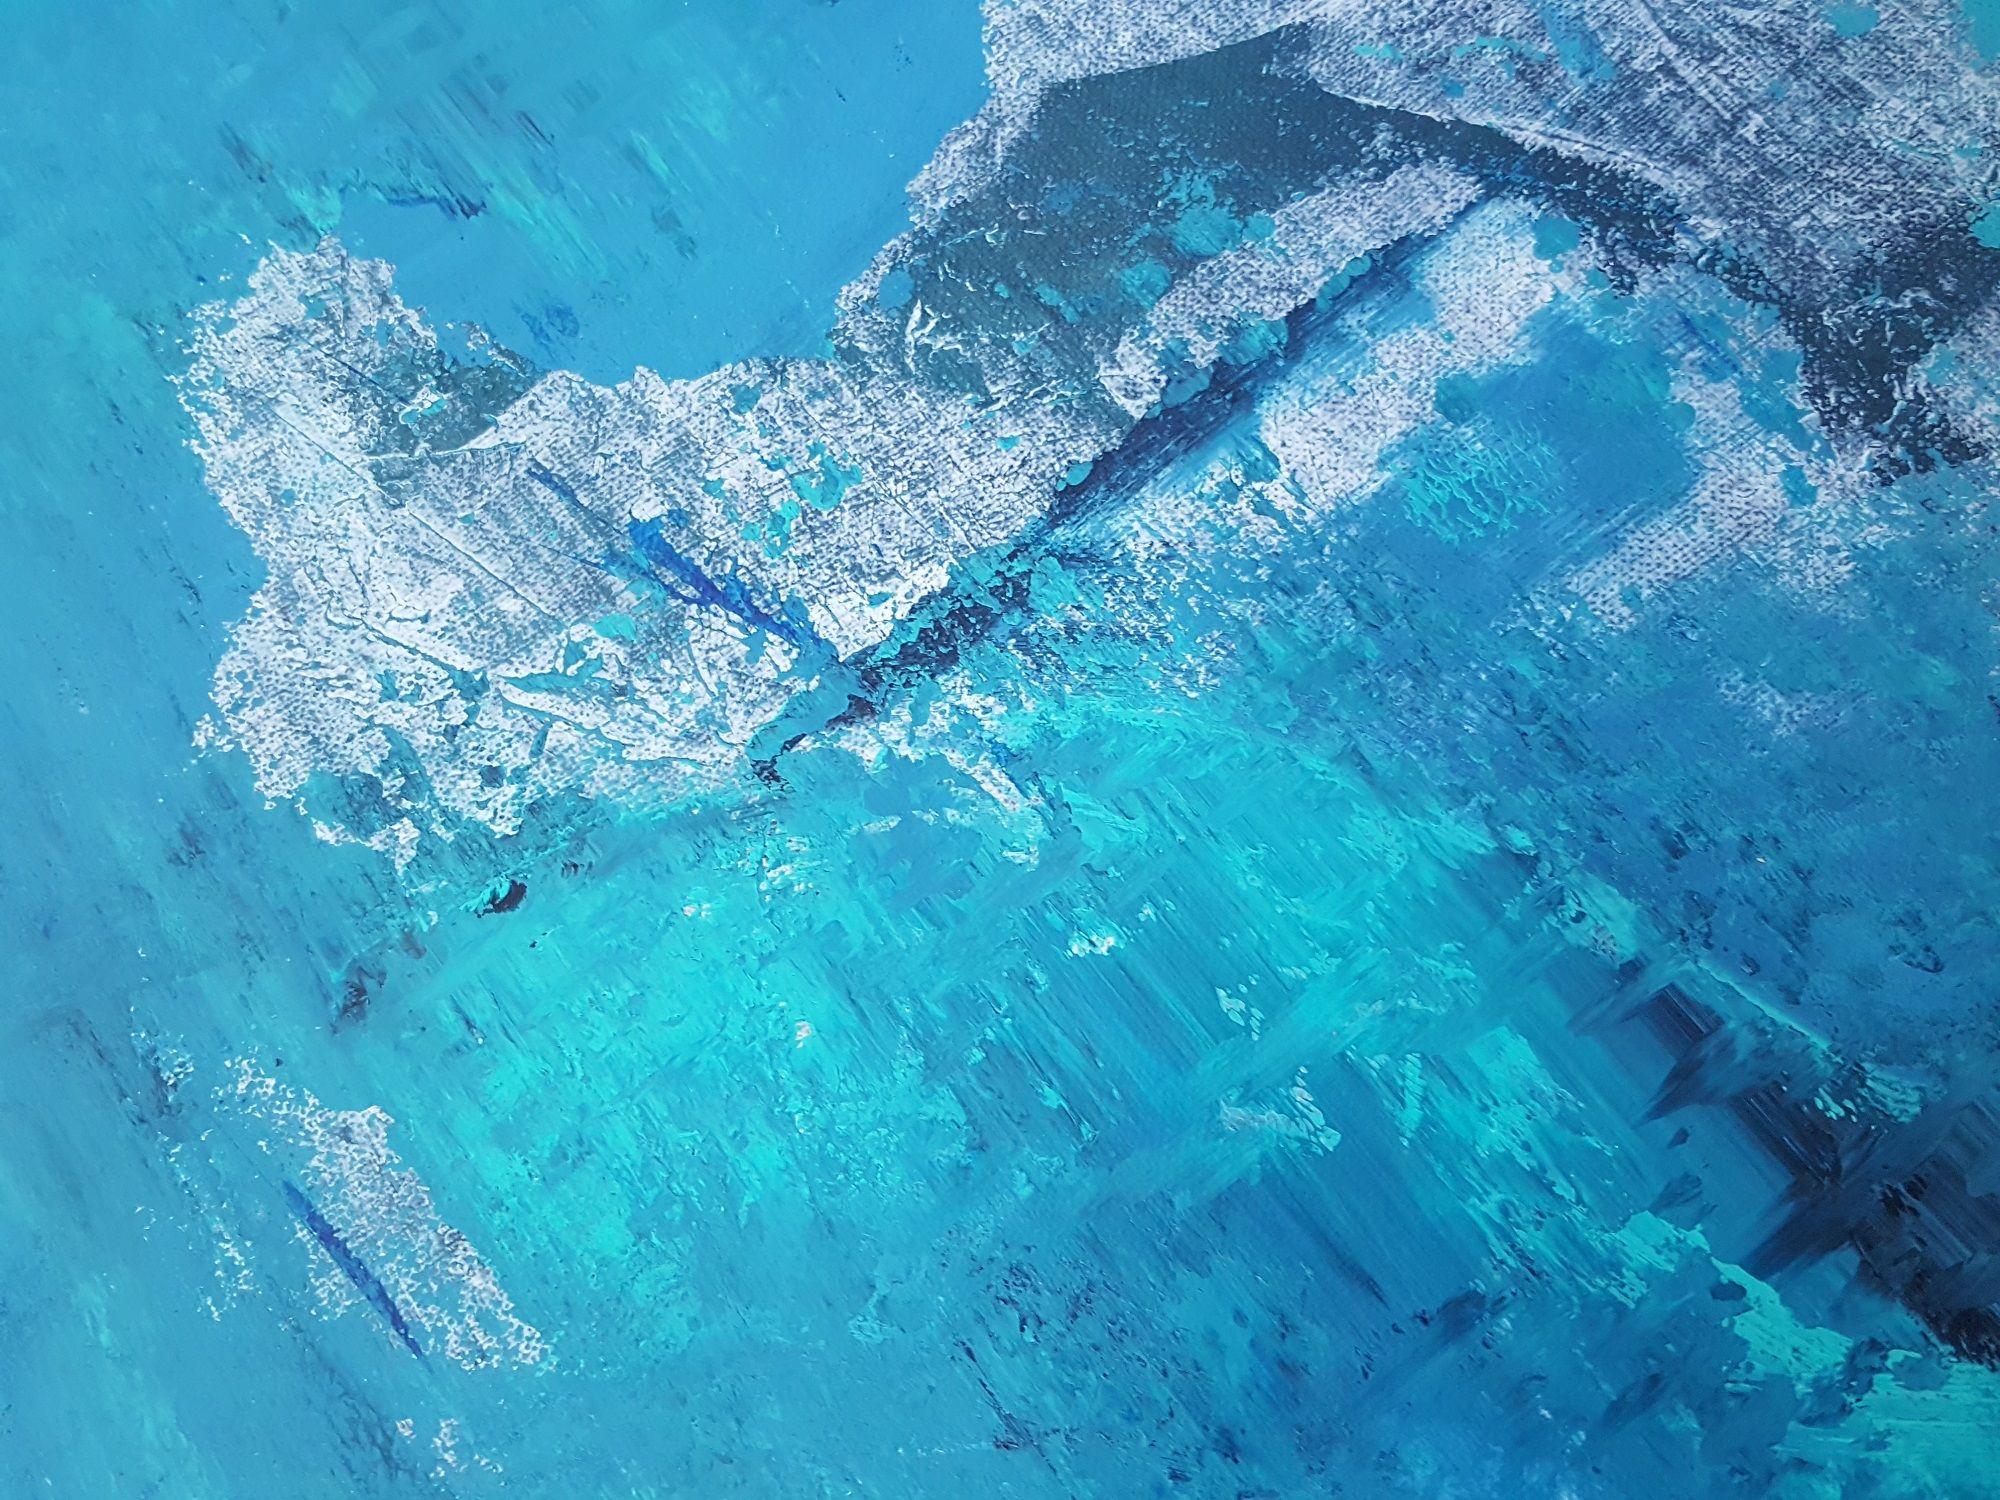 Arctic blues, Painting, Acrylic on Canvas - Blue Abstract Painting by Ivana Olbricht